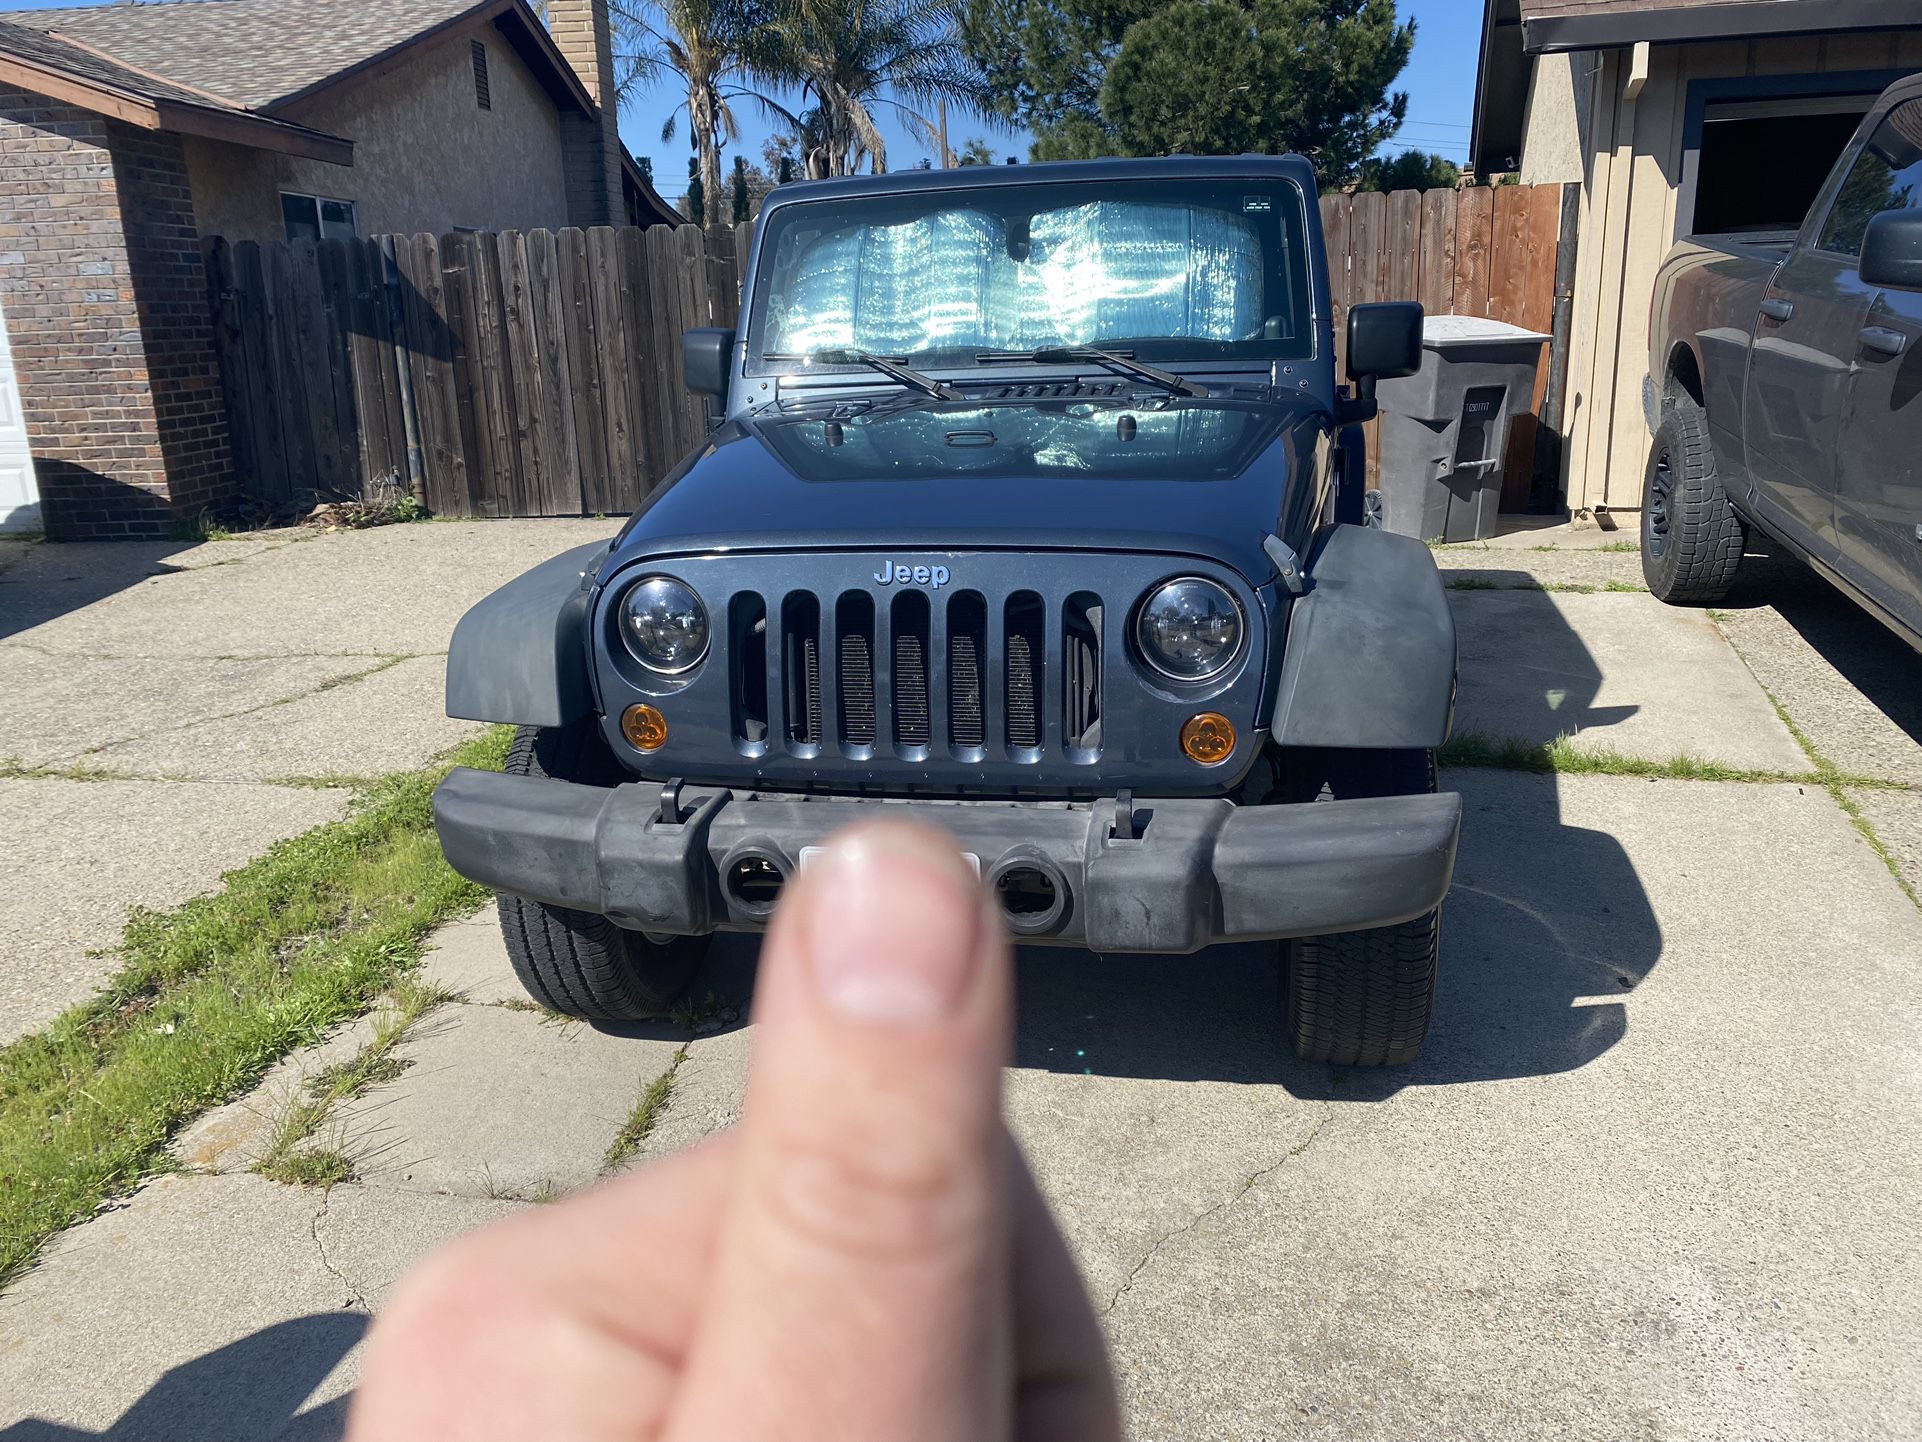 2007 Jeep Wrangler for Sale in Manteca, CA - OfferUp